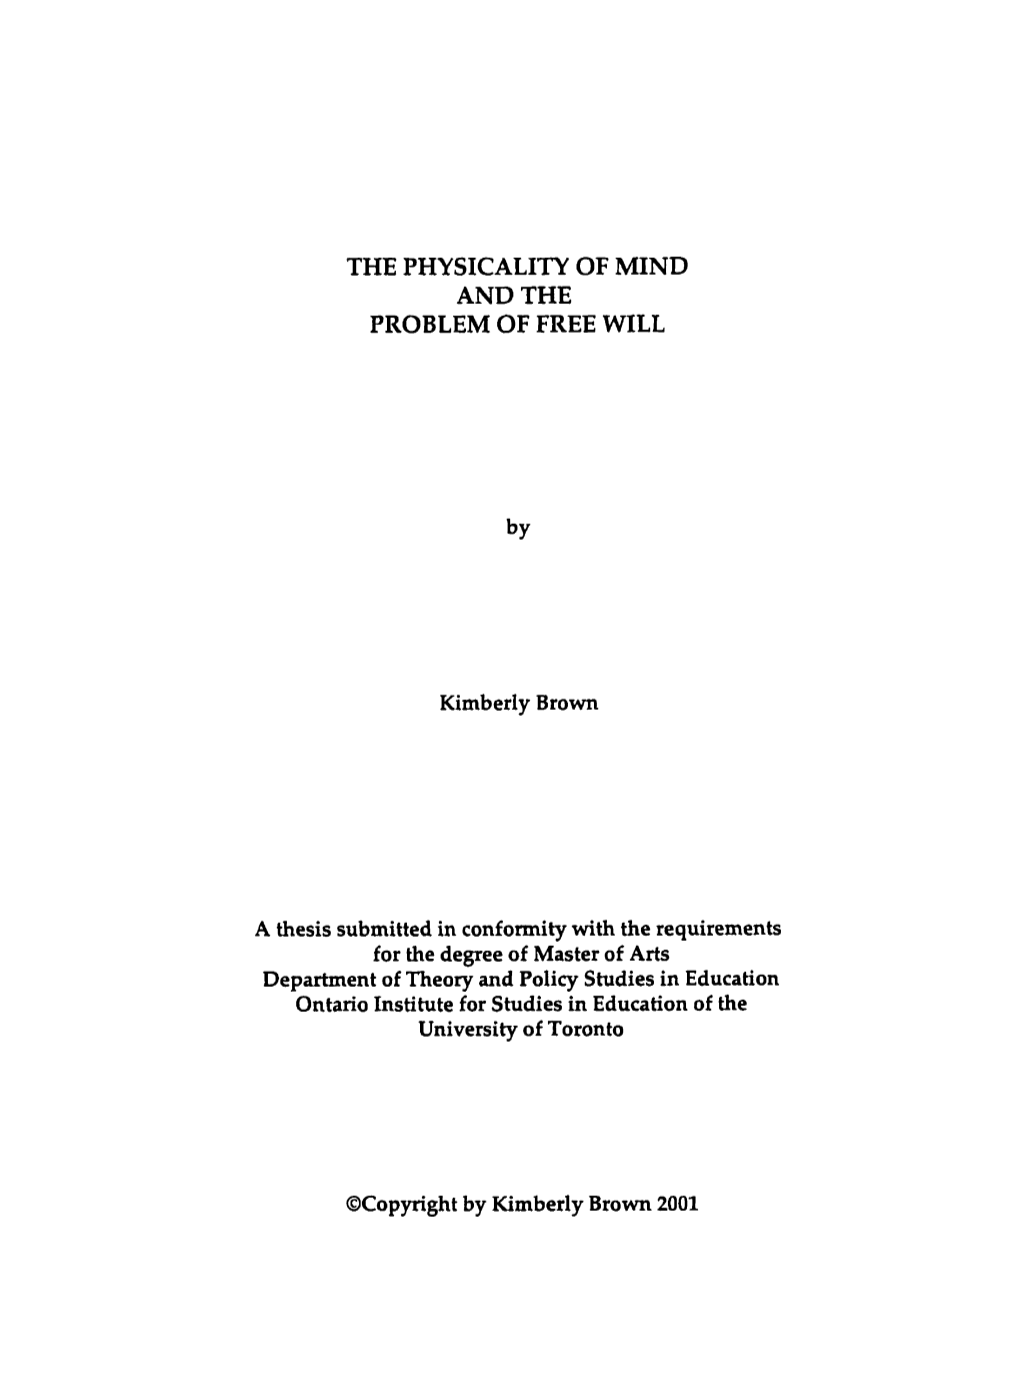 The Physicality of Mind and the Problem of Free Will